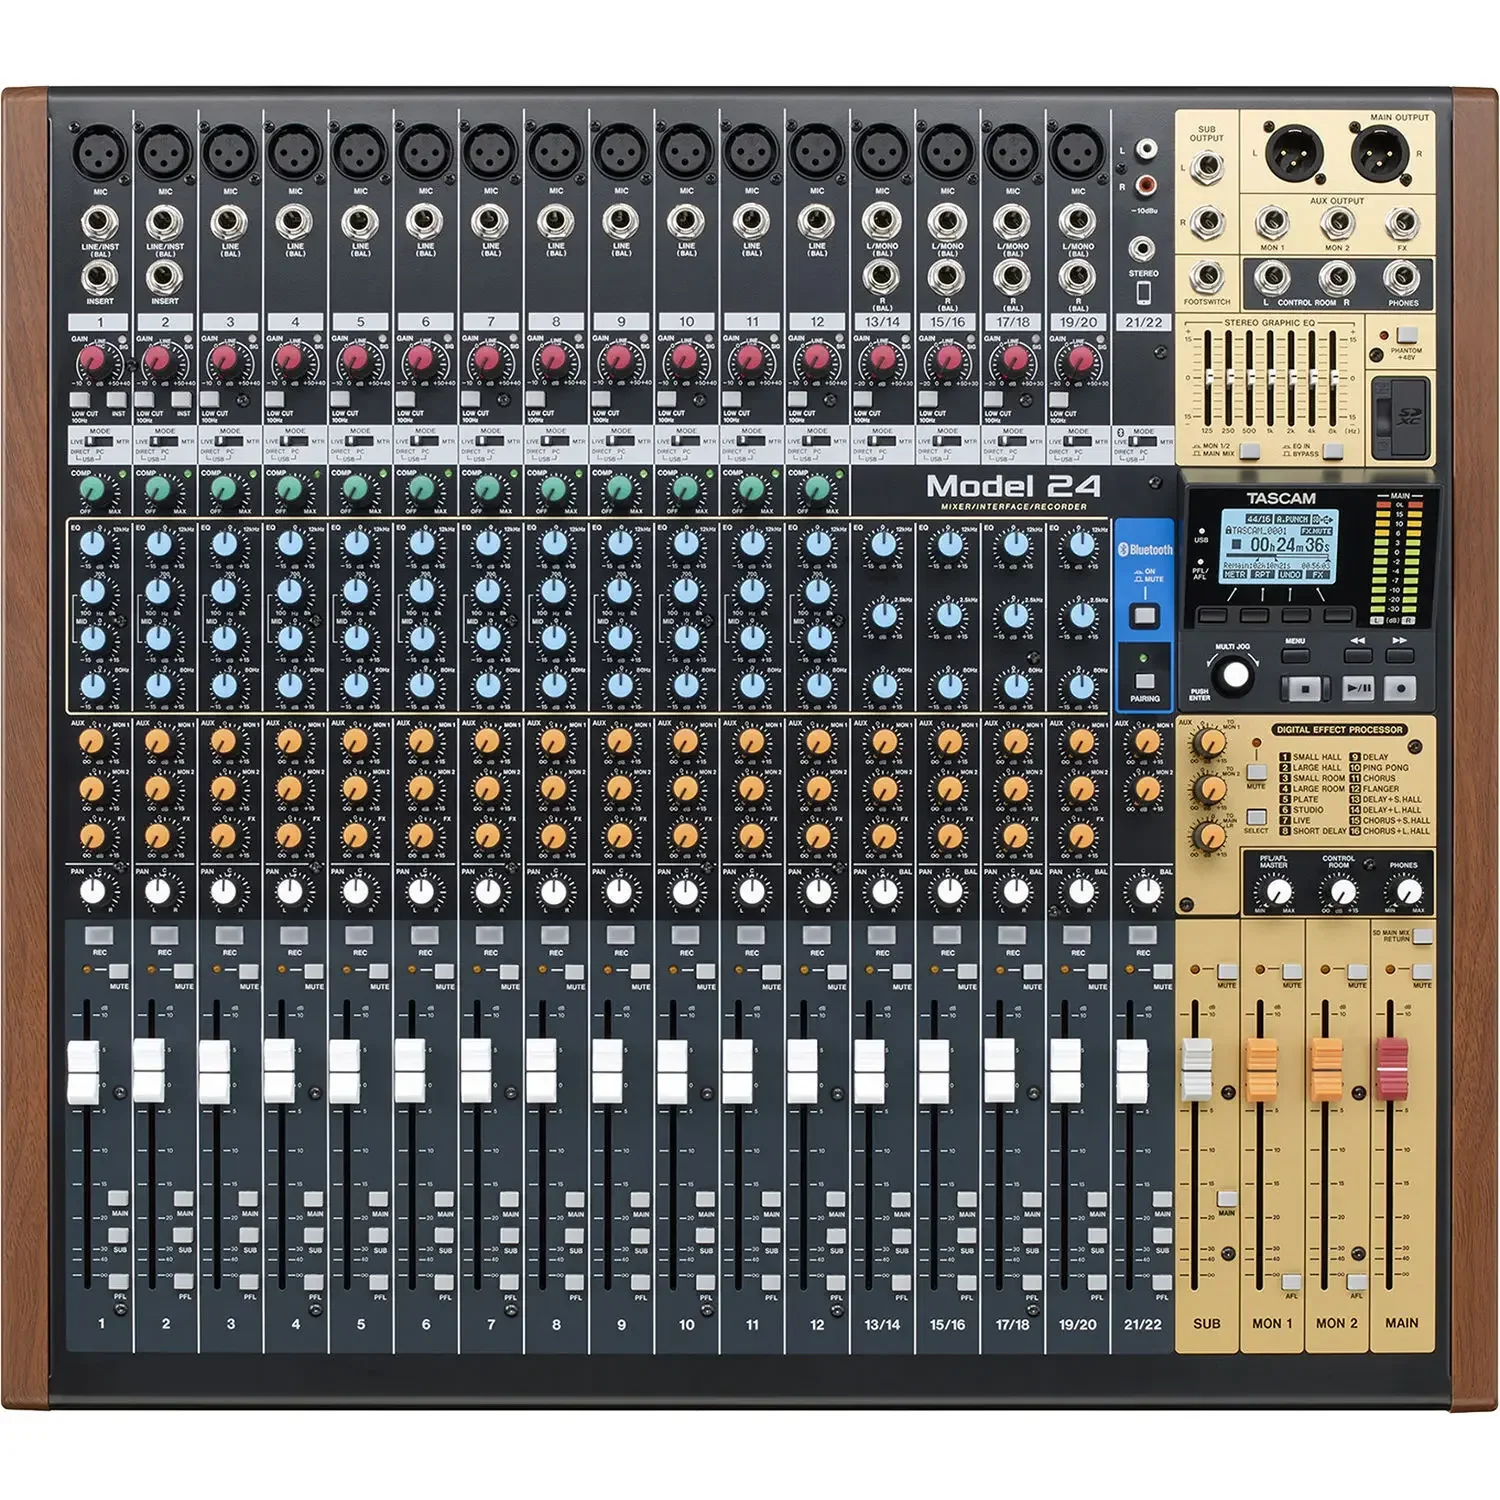 

(NEW DISCOUNT) TASCAM Model 24 Mixer / Interface / Recorder